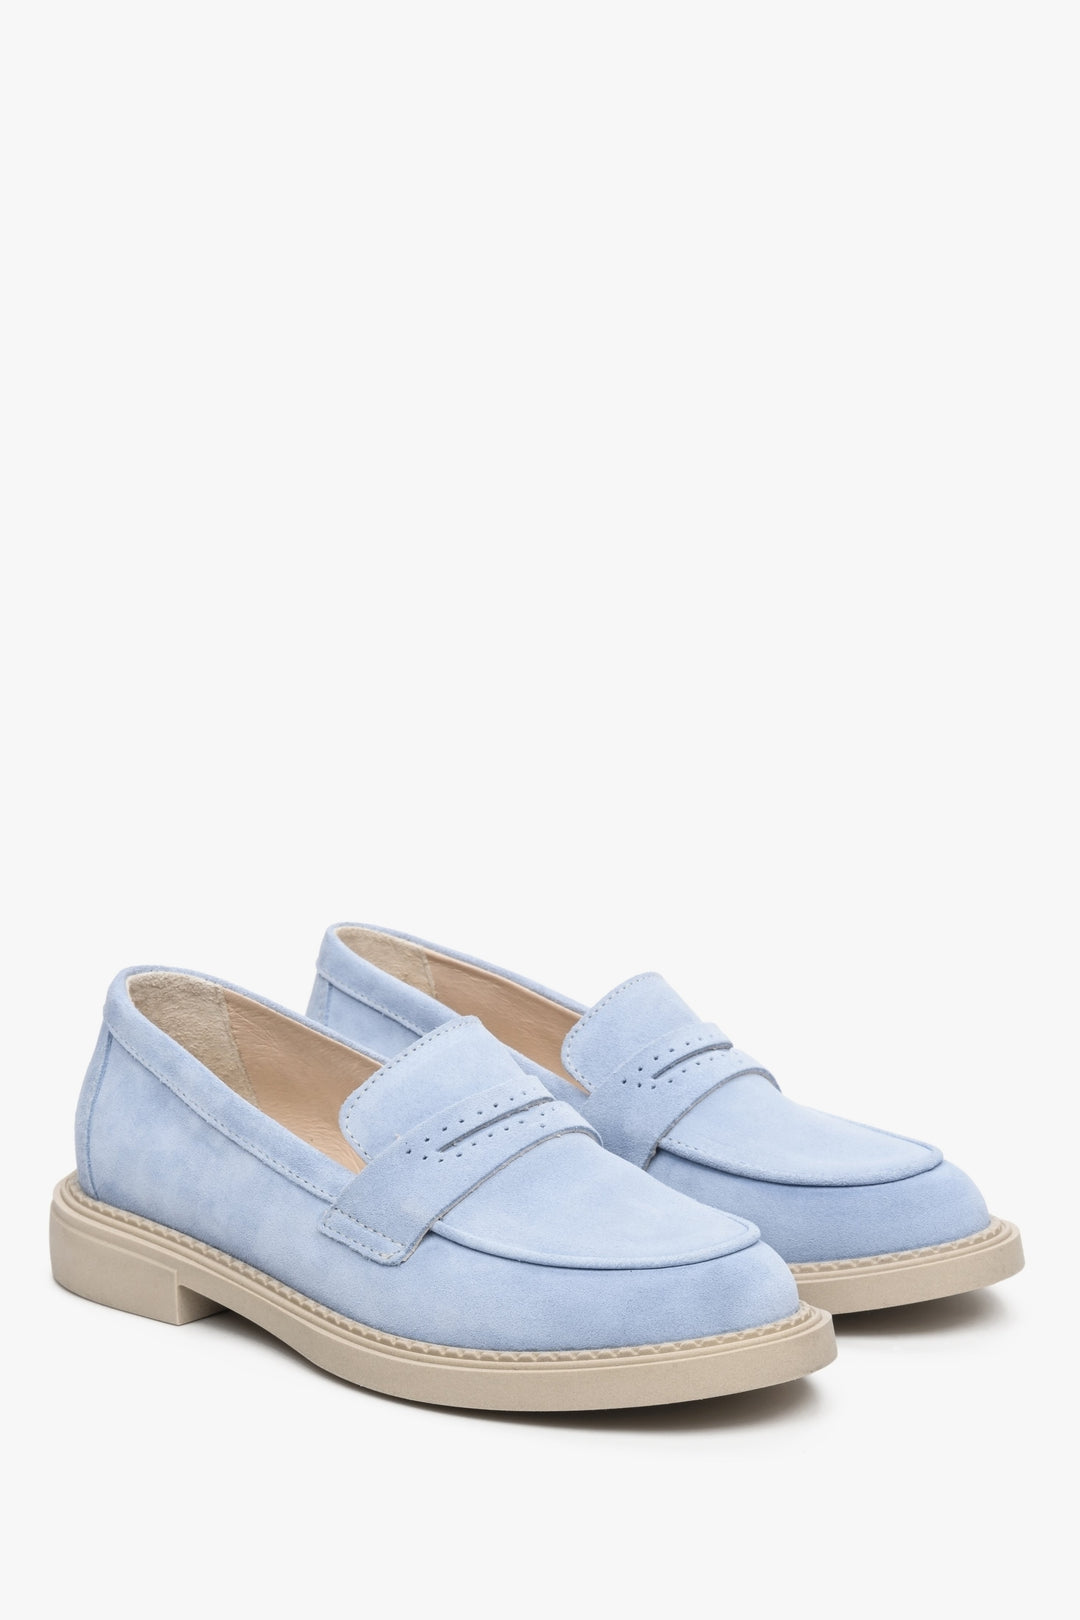 Women's light blue suede loafers for spring Estro.